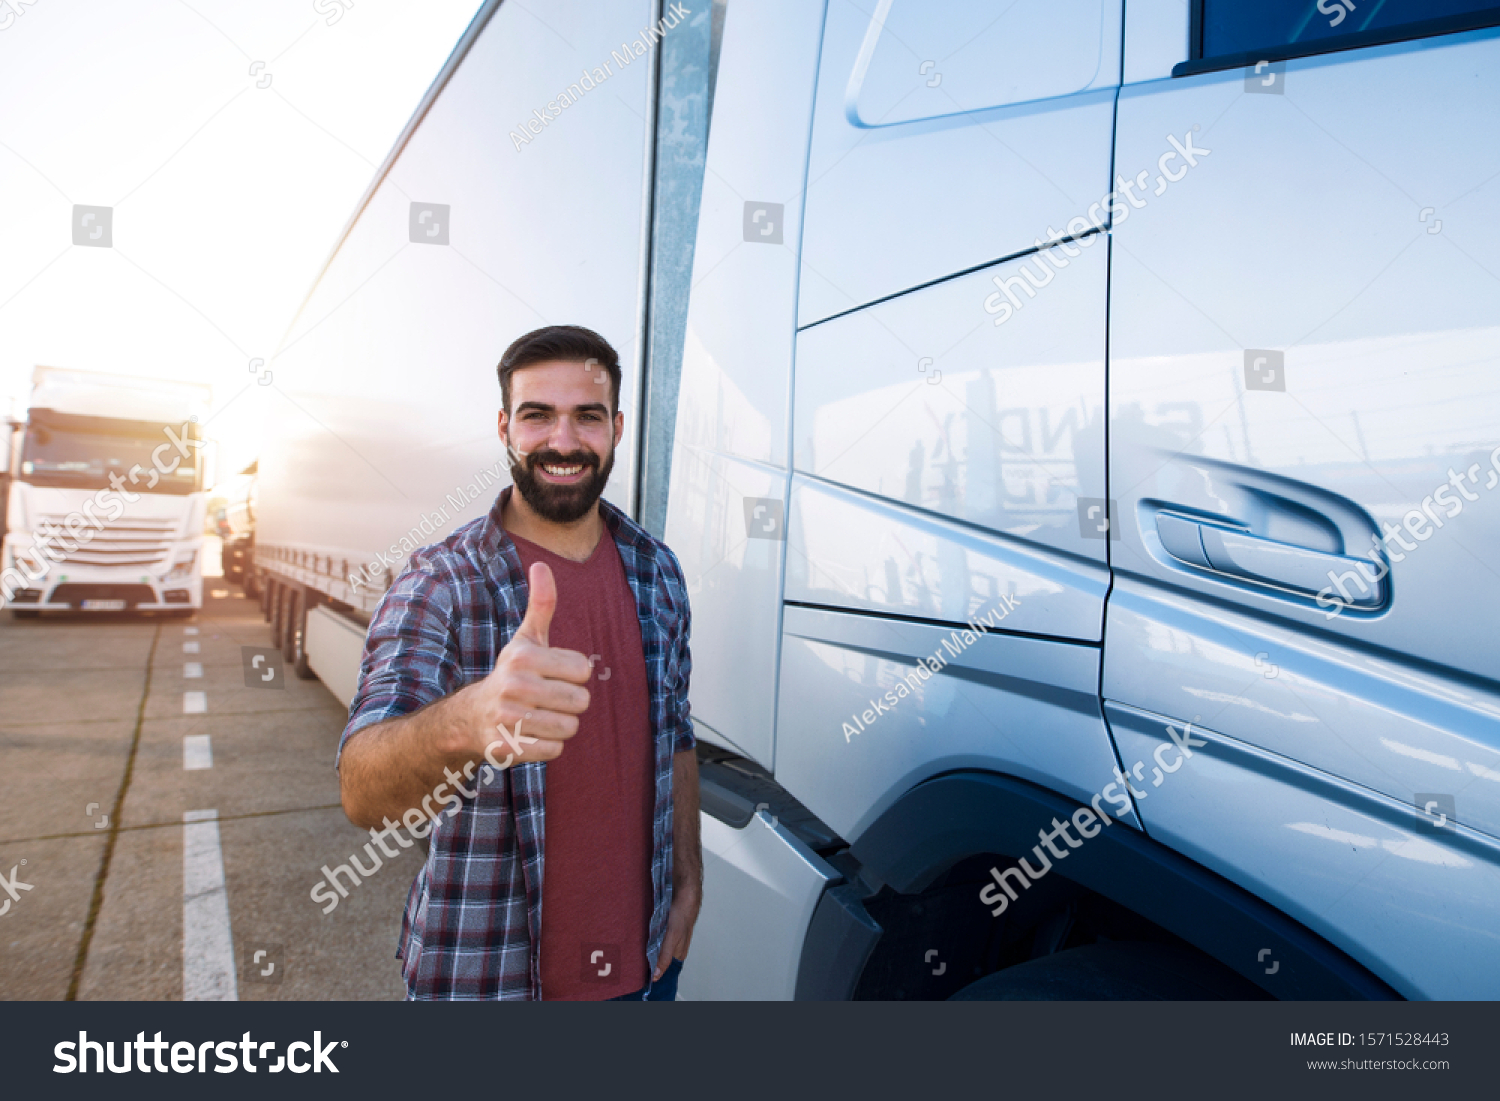 Portrait of young bearded man with thumbs up standing by his truck. Professional and positive truck driver standing by semi truck vehicle. Transportation services. #1571528443